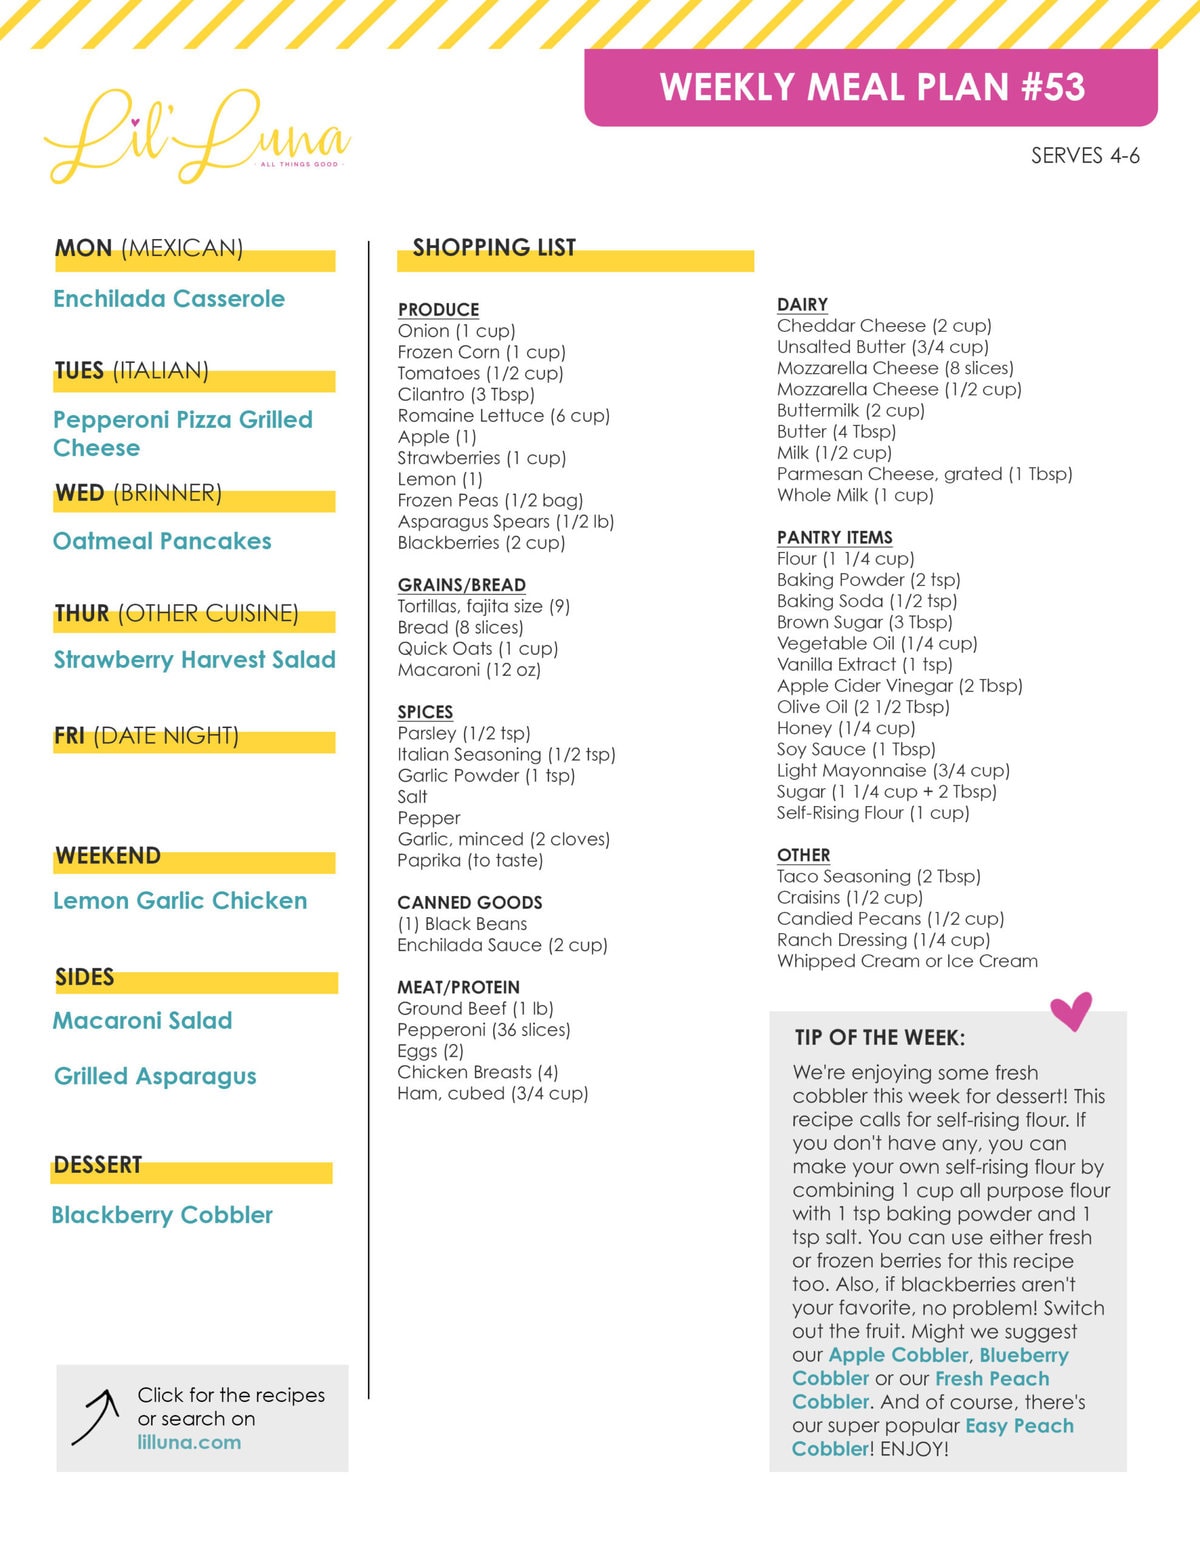 Printable version of Meal Plan #53 with grocery list and tip of the week.